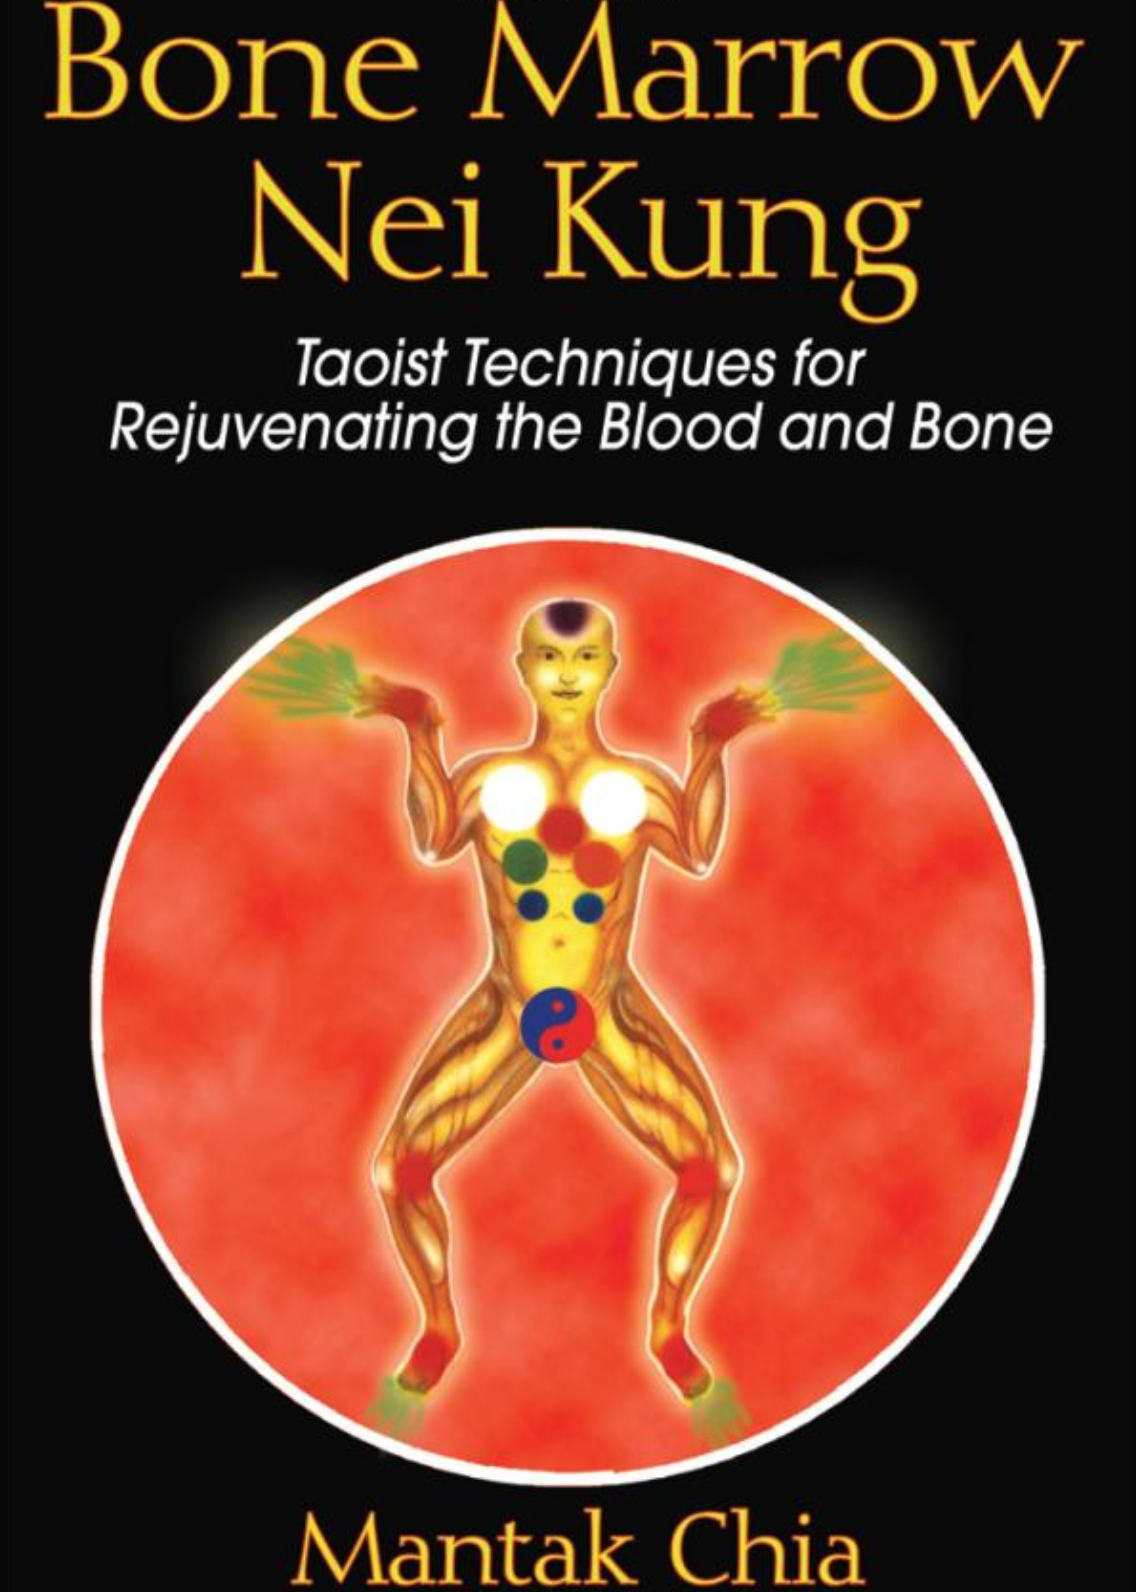 Bone Marrow Nei Kung: Taoist Techniques for Rejuvenating the Blood and Bone Book by Mantak Chia (Preowned)